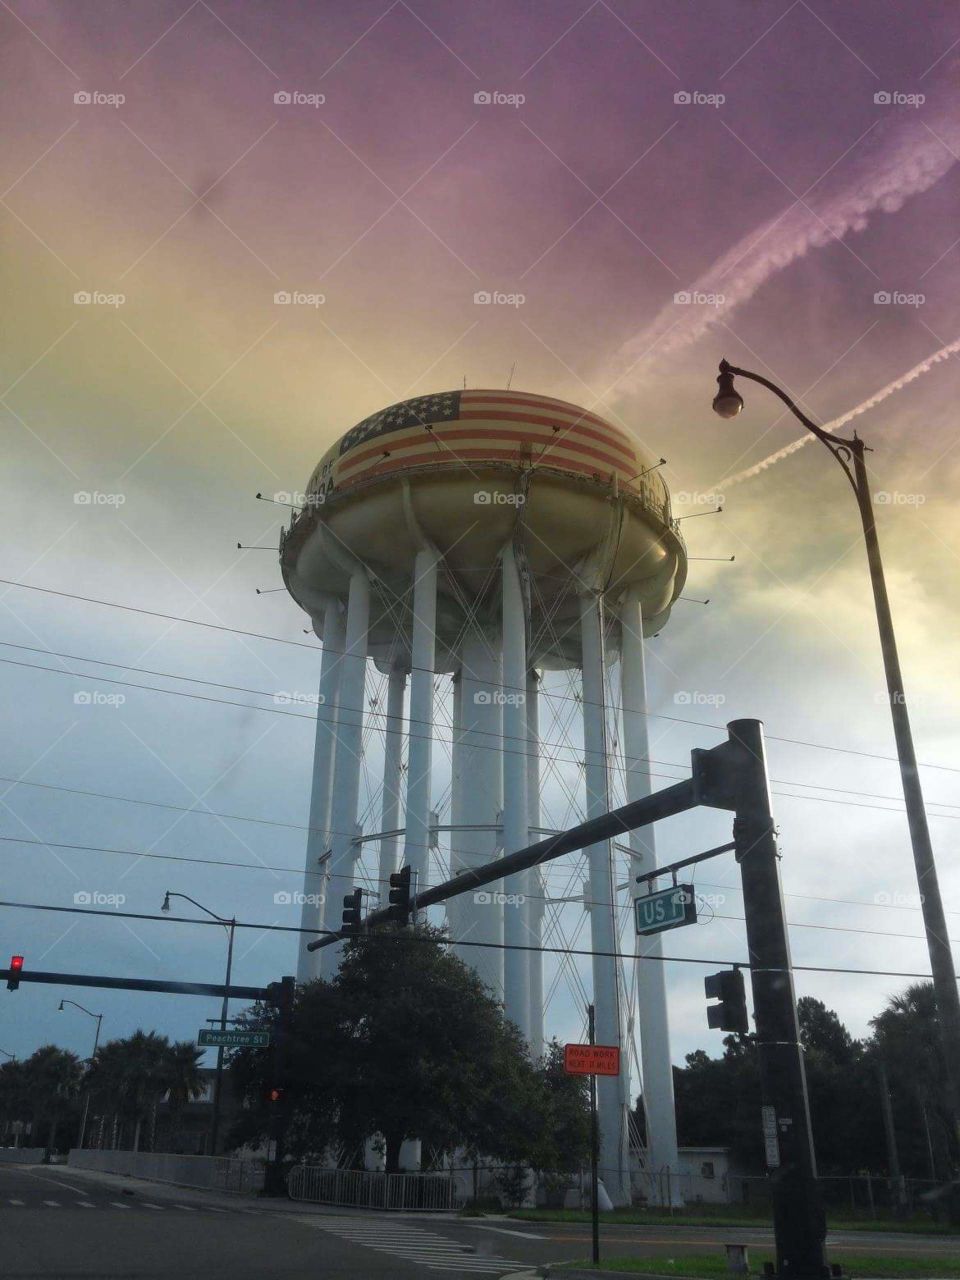 USA Water Tower